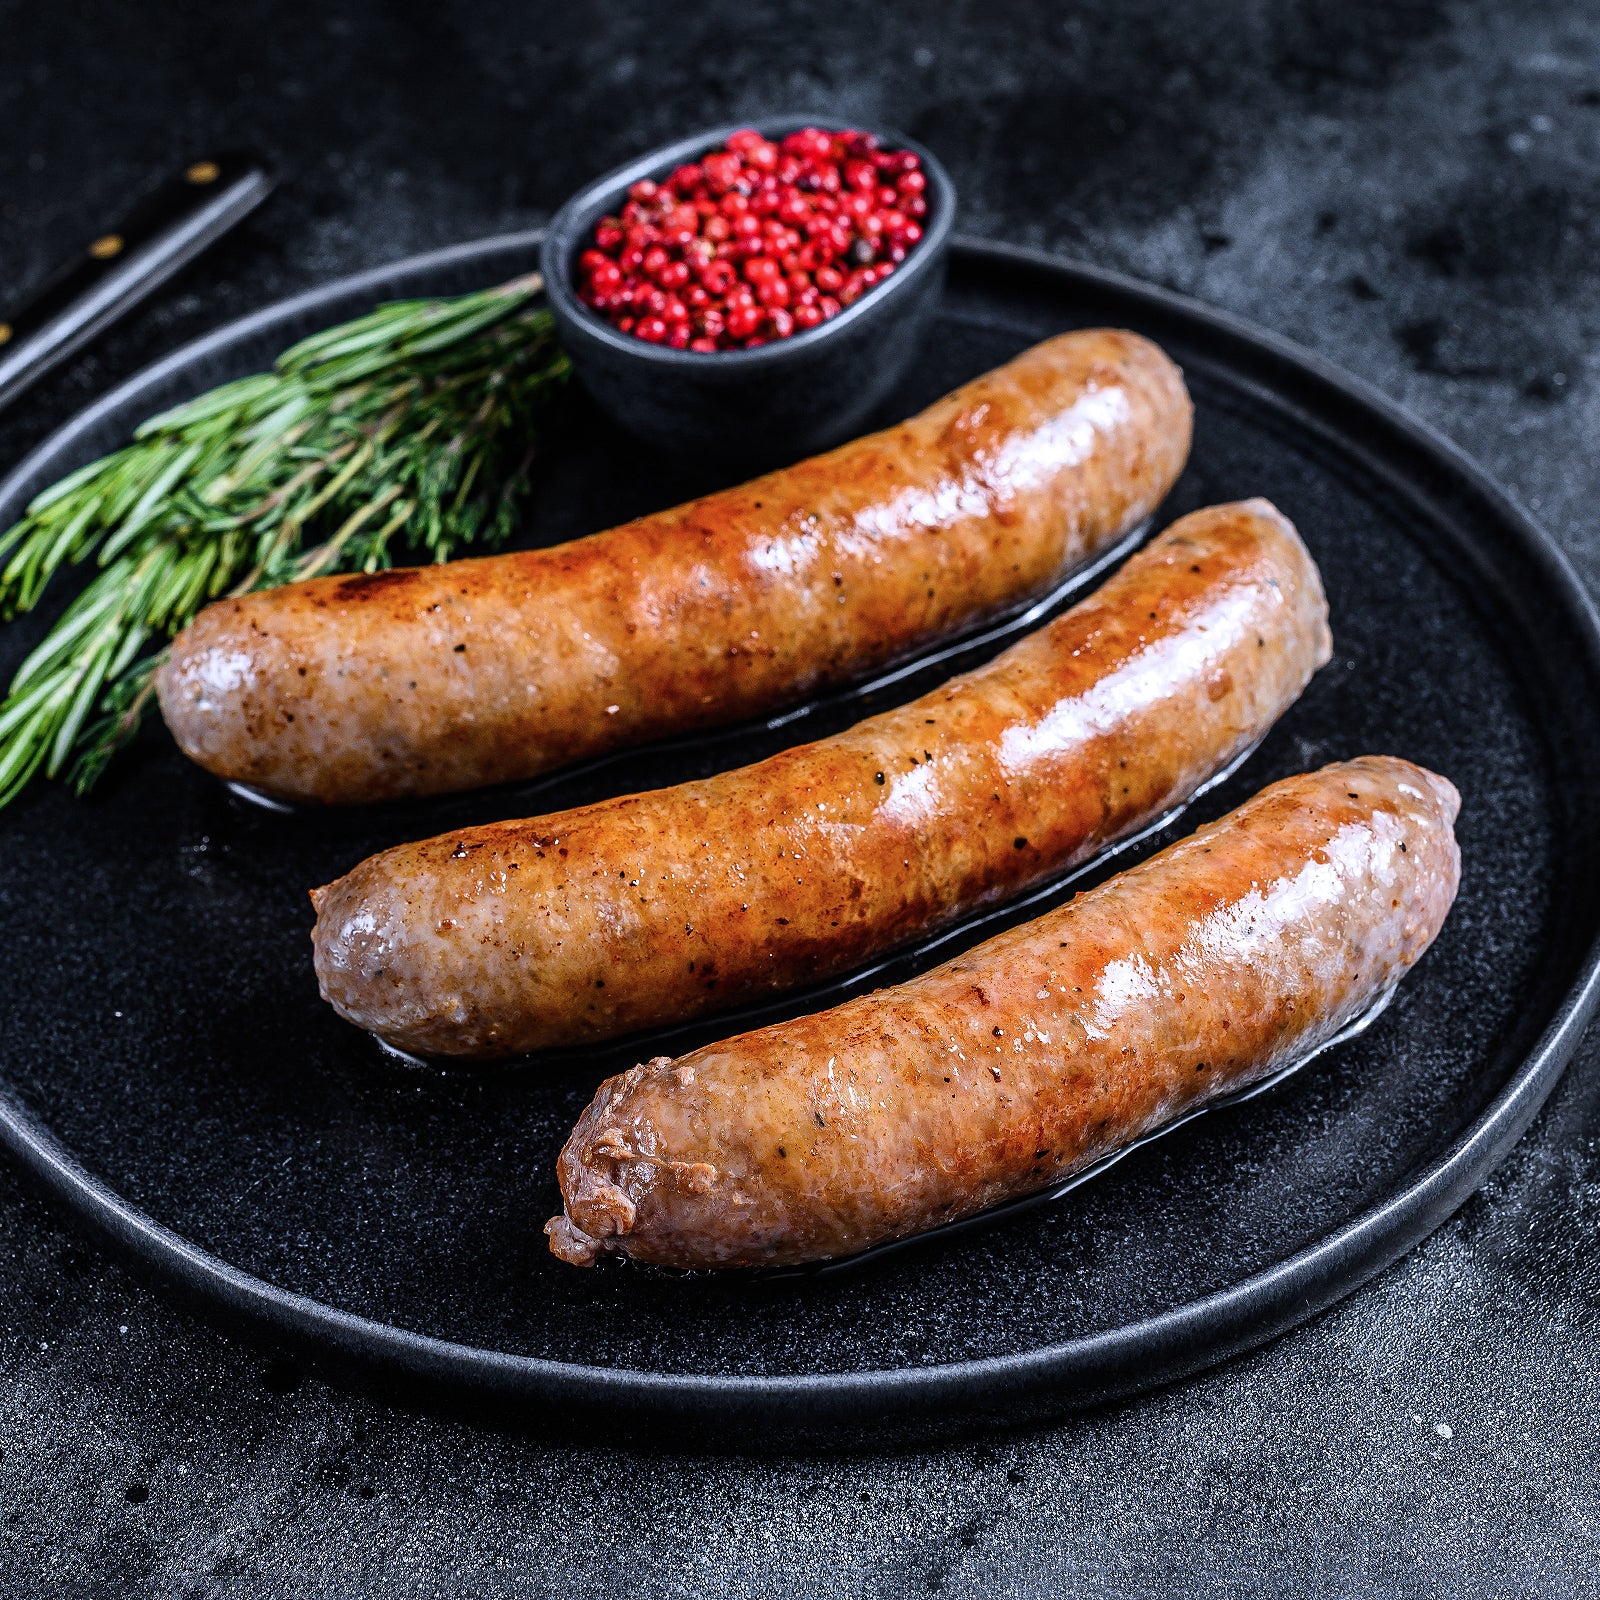 All-Natural Grass-Fed Beef Sausage from New Zealand (300g) - Horizon Farms